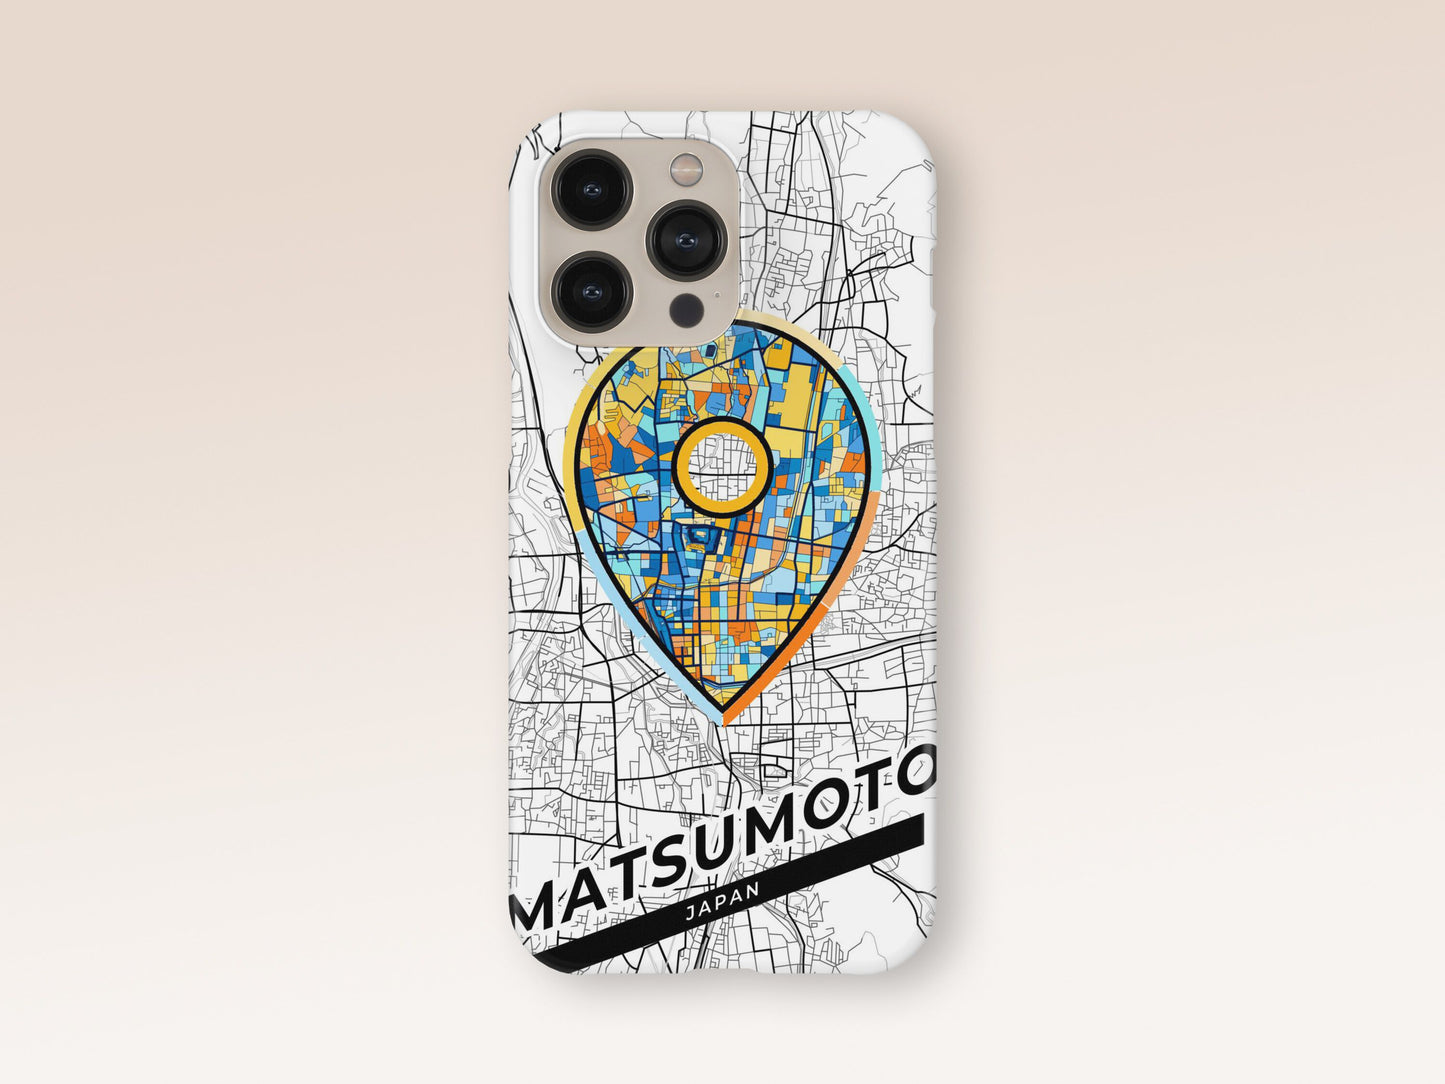 Matsumoto Japan slim phone case with colorful icon. Birthday, wedding or housewarming gift. Couple match cases. 1